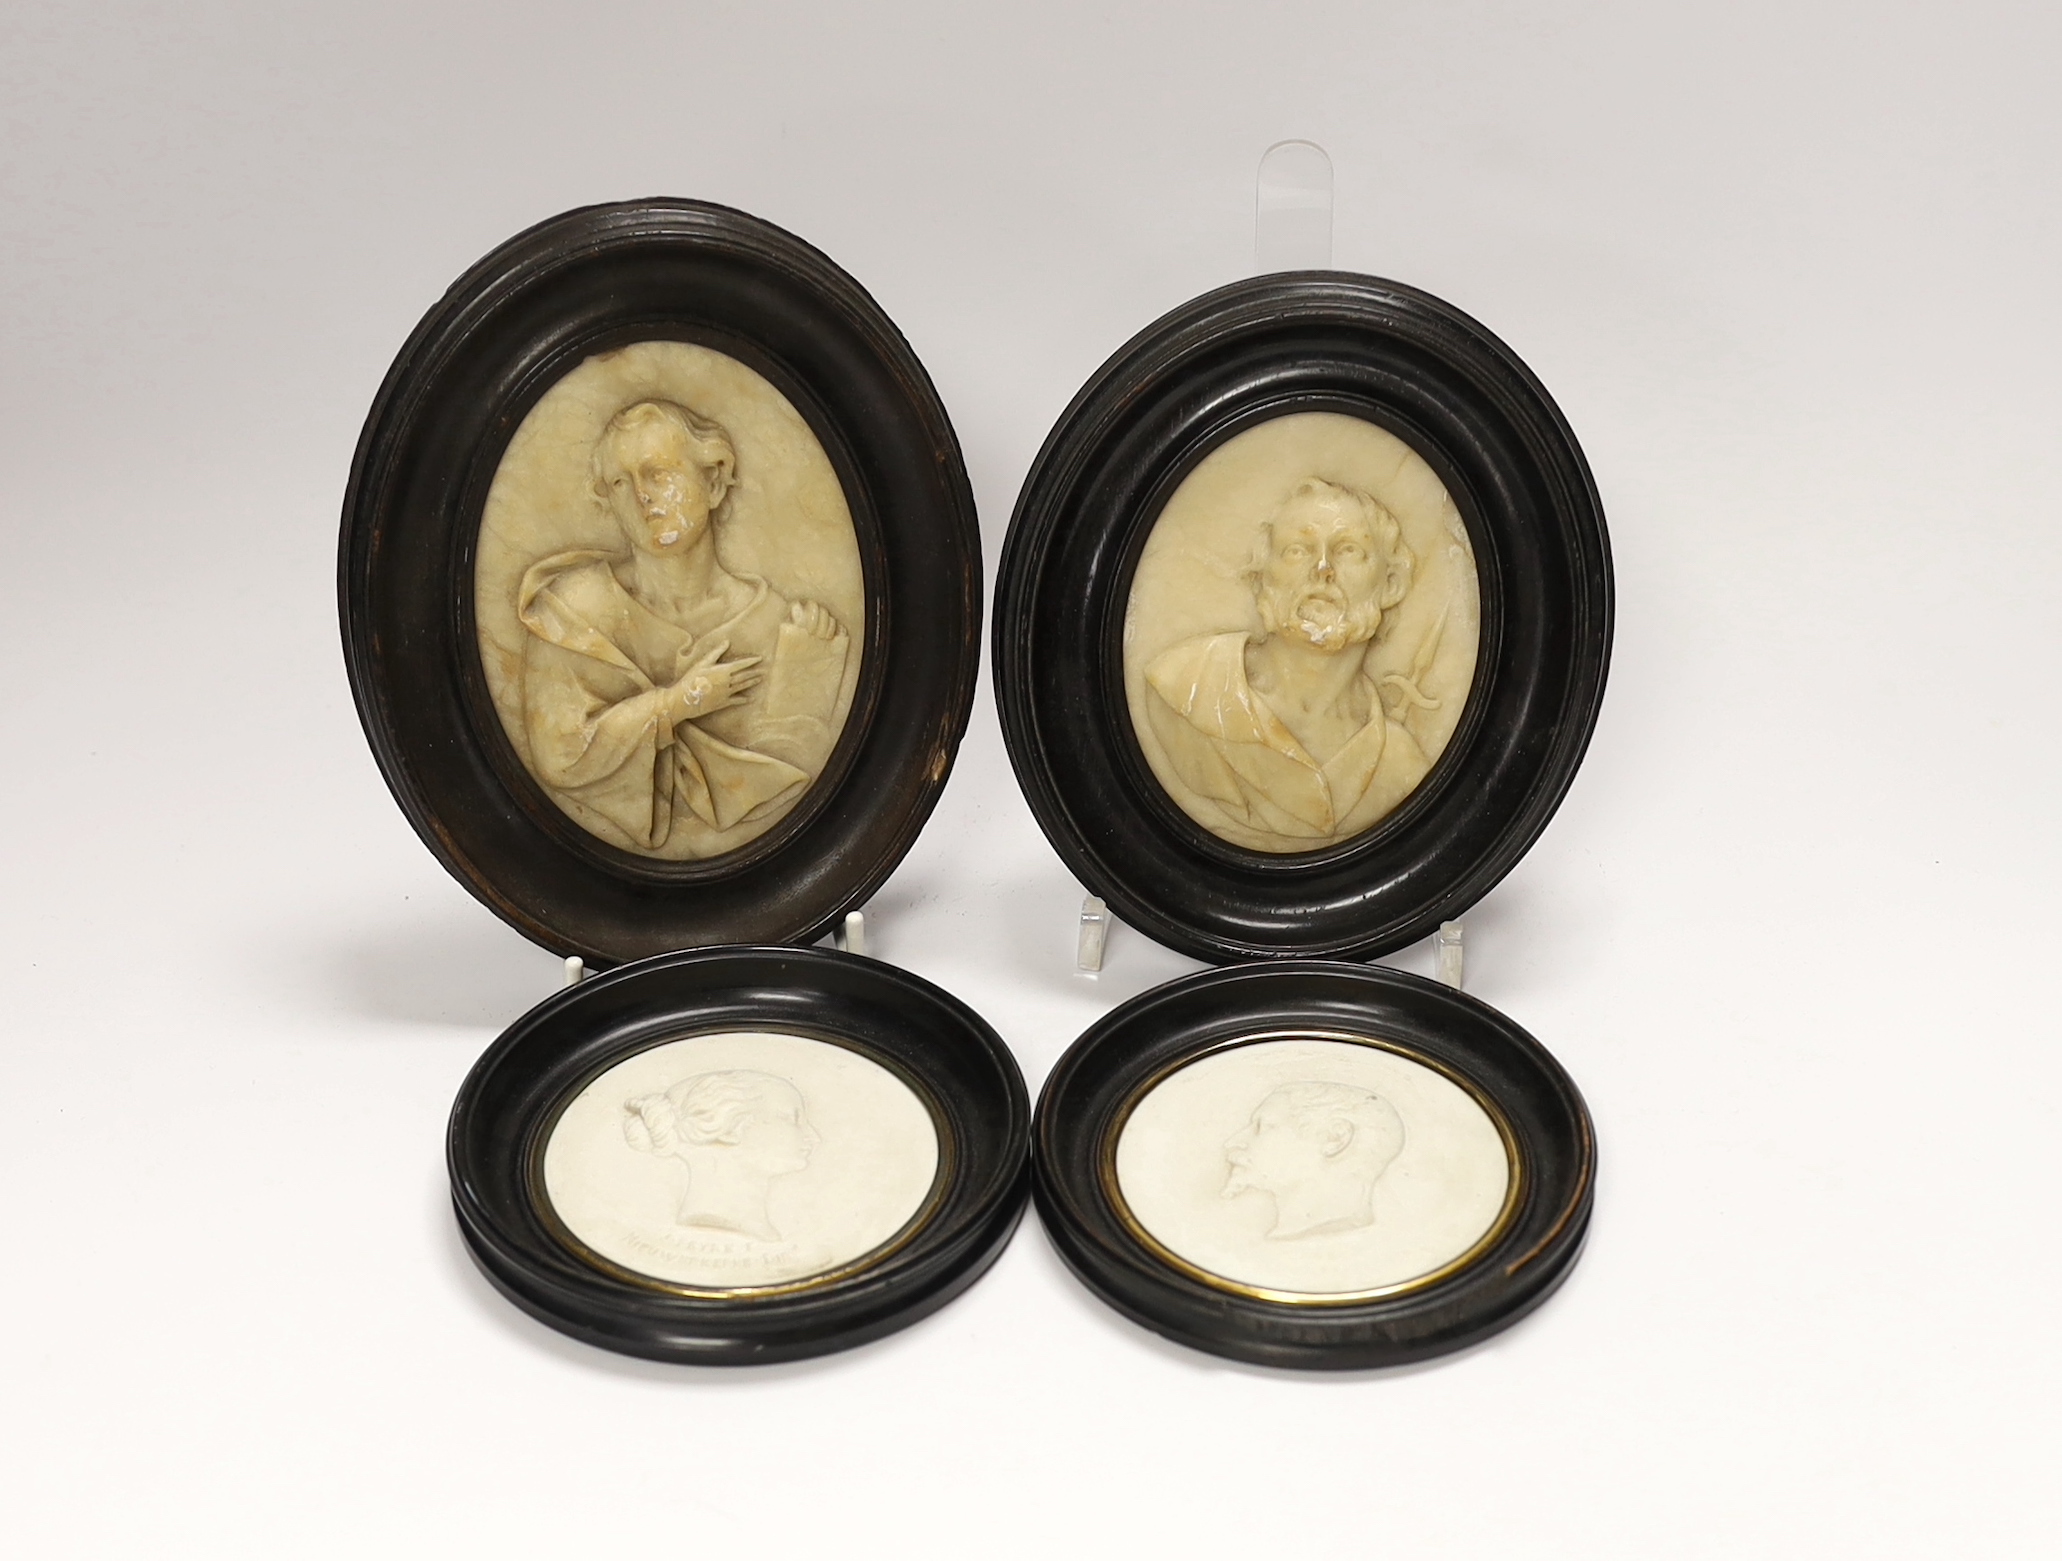 A pair of 19th century alabaster relief carved religious plaques and a pair of Sevres biscuit